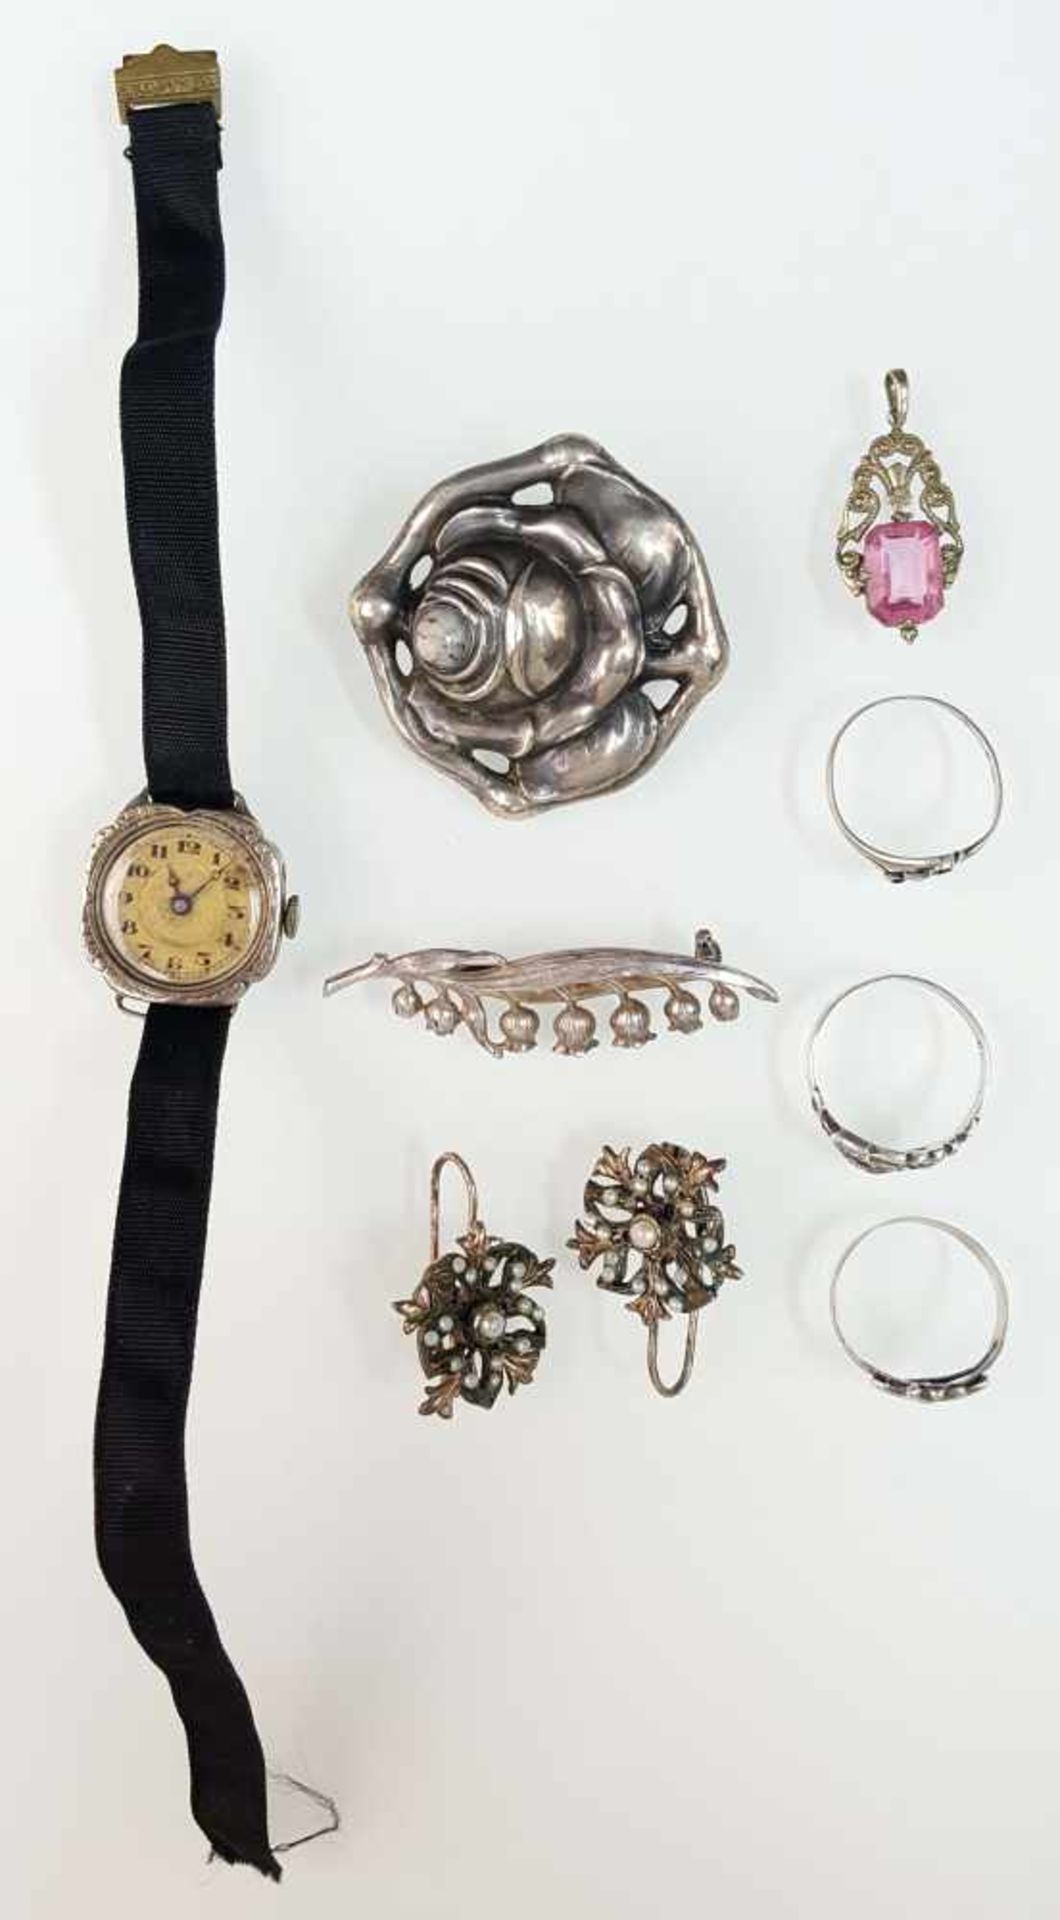 Silver jewelry. Pendants, rings, earrings, watch and brooches. - Image 6 of 12